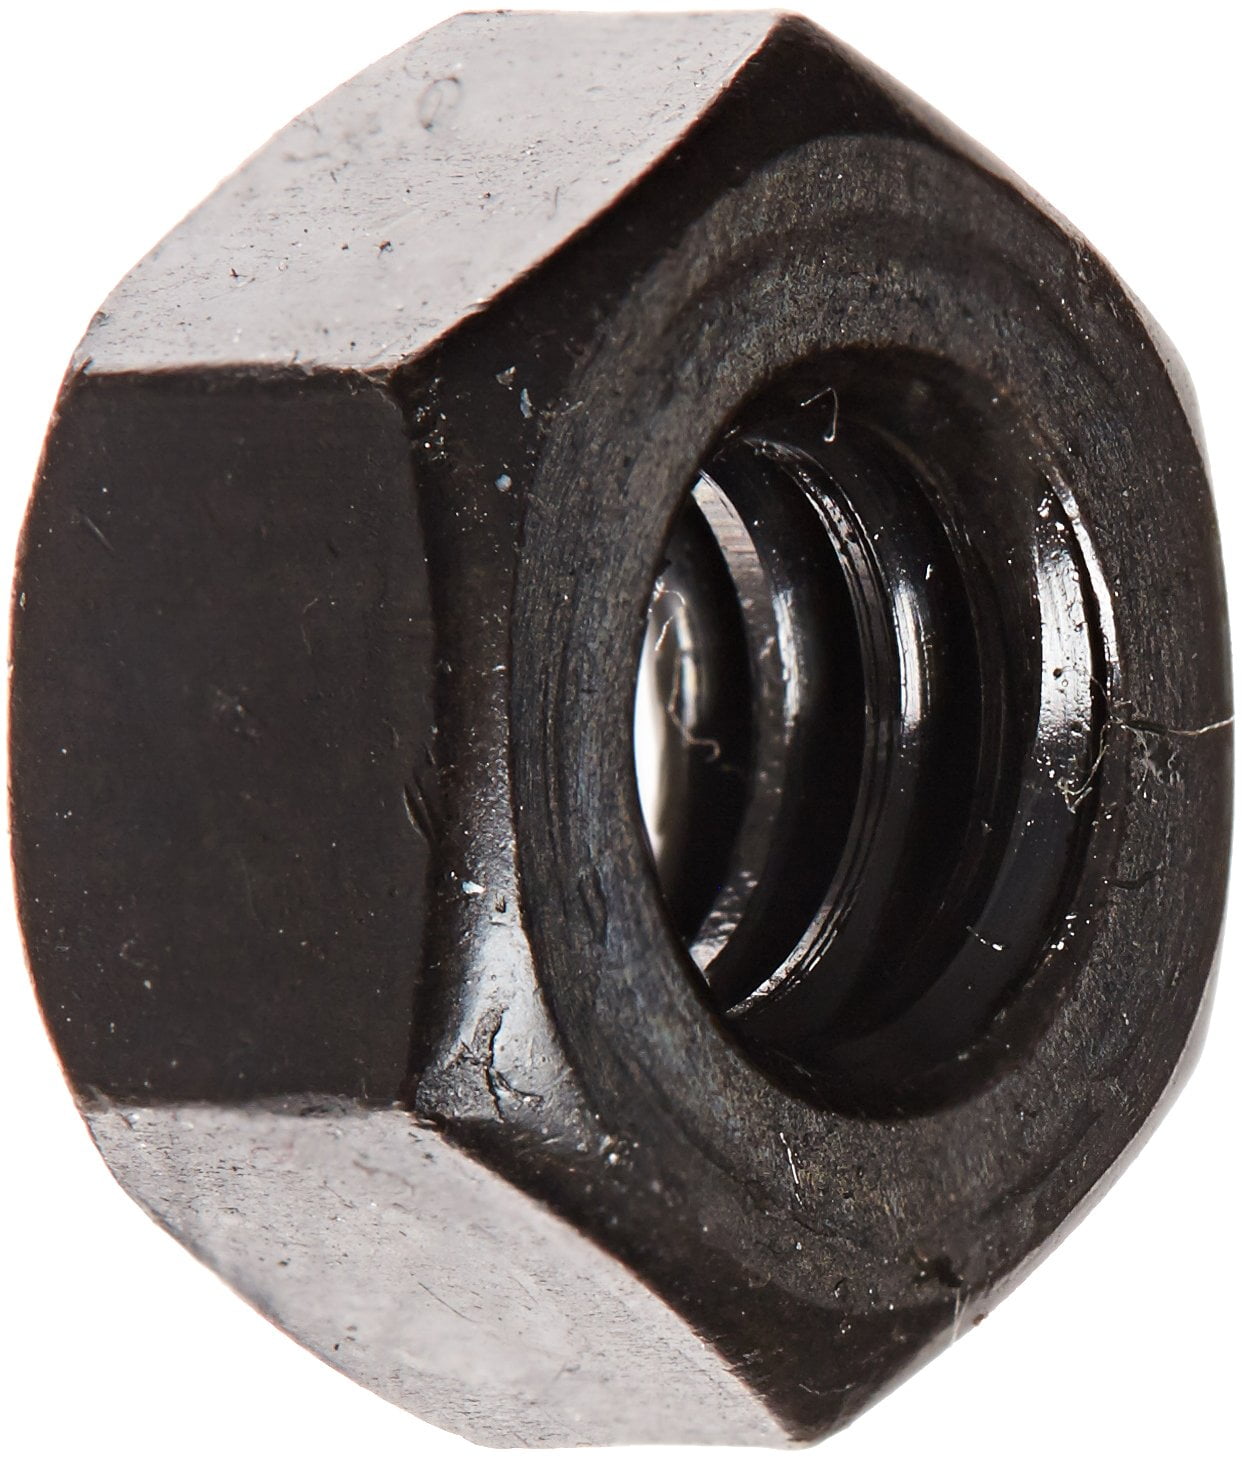 Black Stainless Steel Hex Nuts Black Oxide Coated Finished Nuts 1/4" to 1/2" 